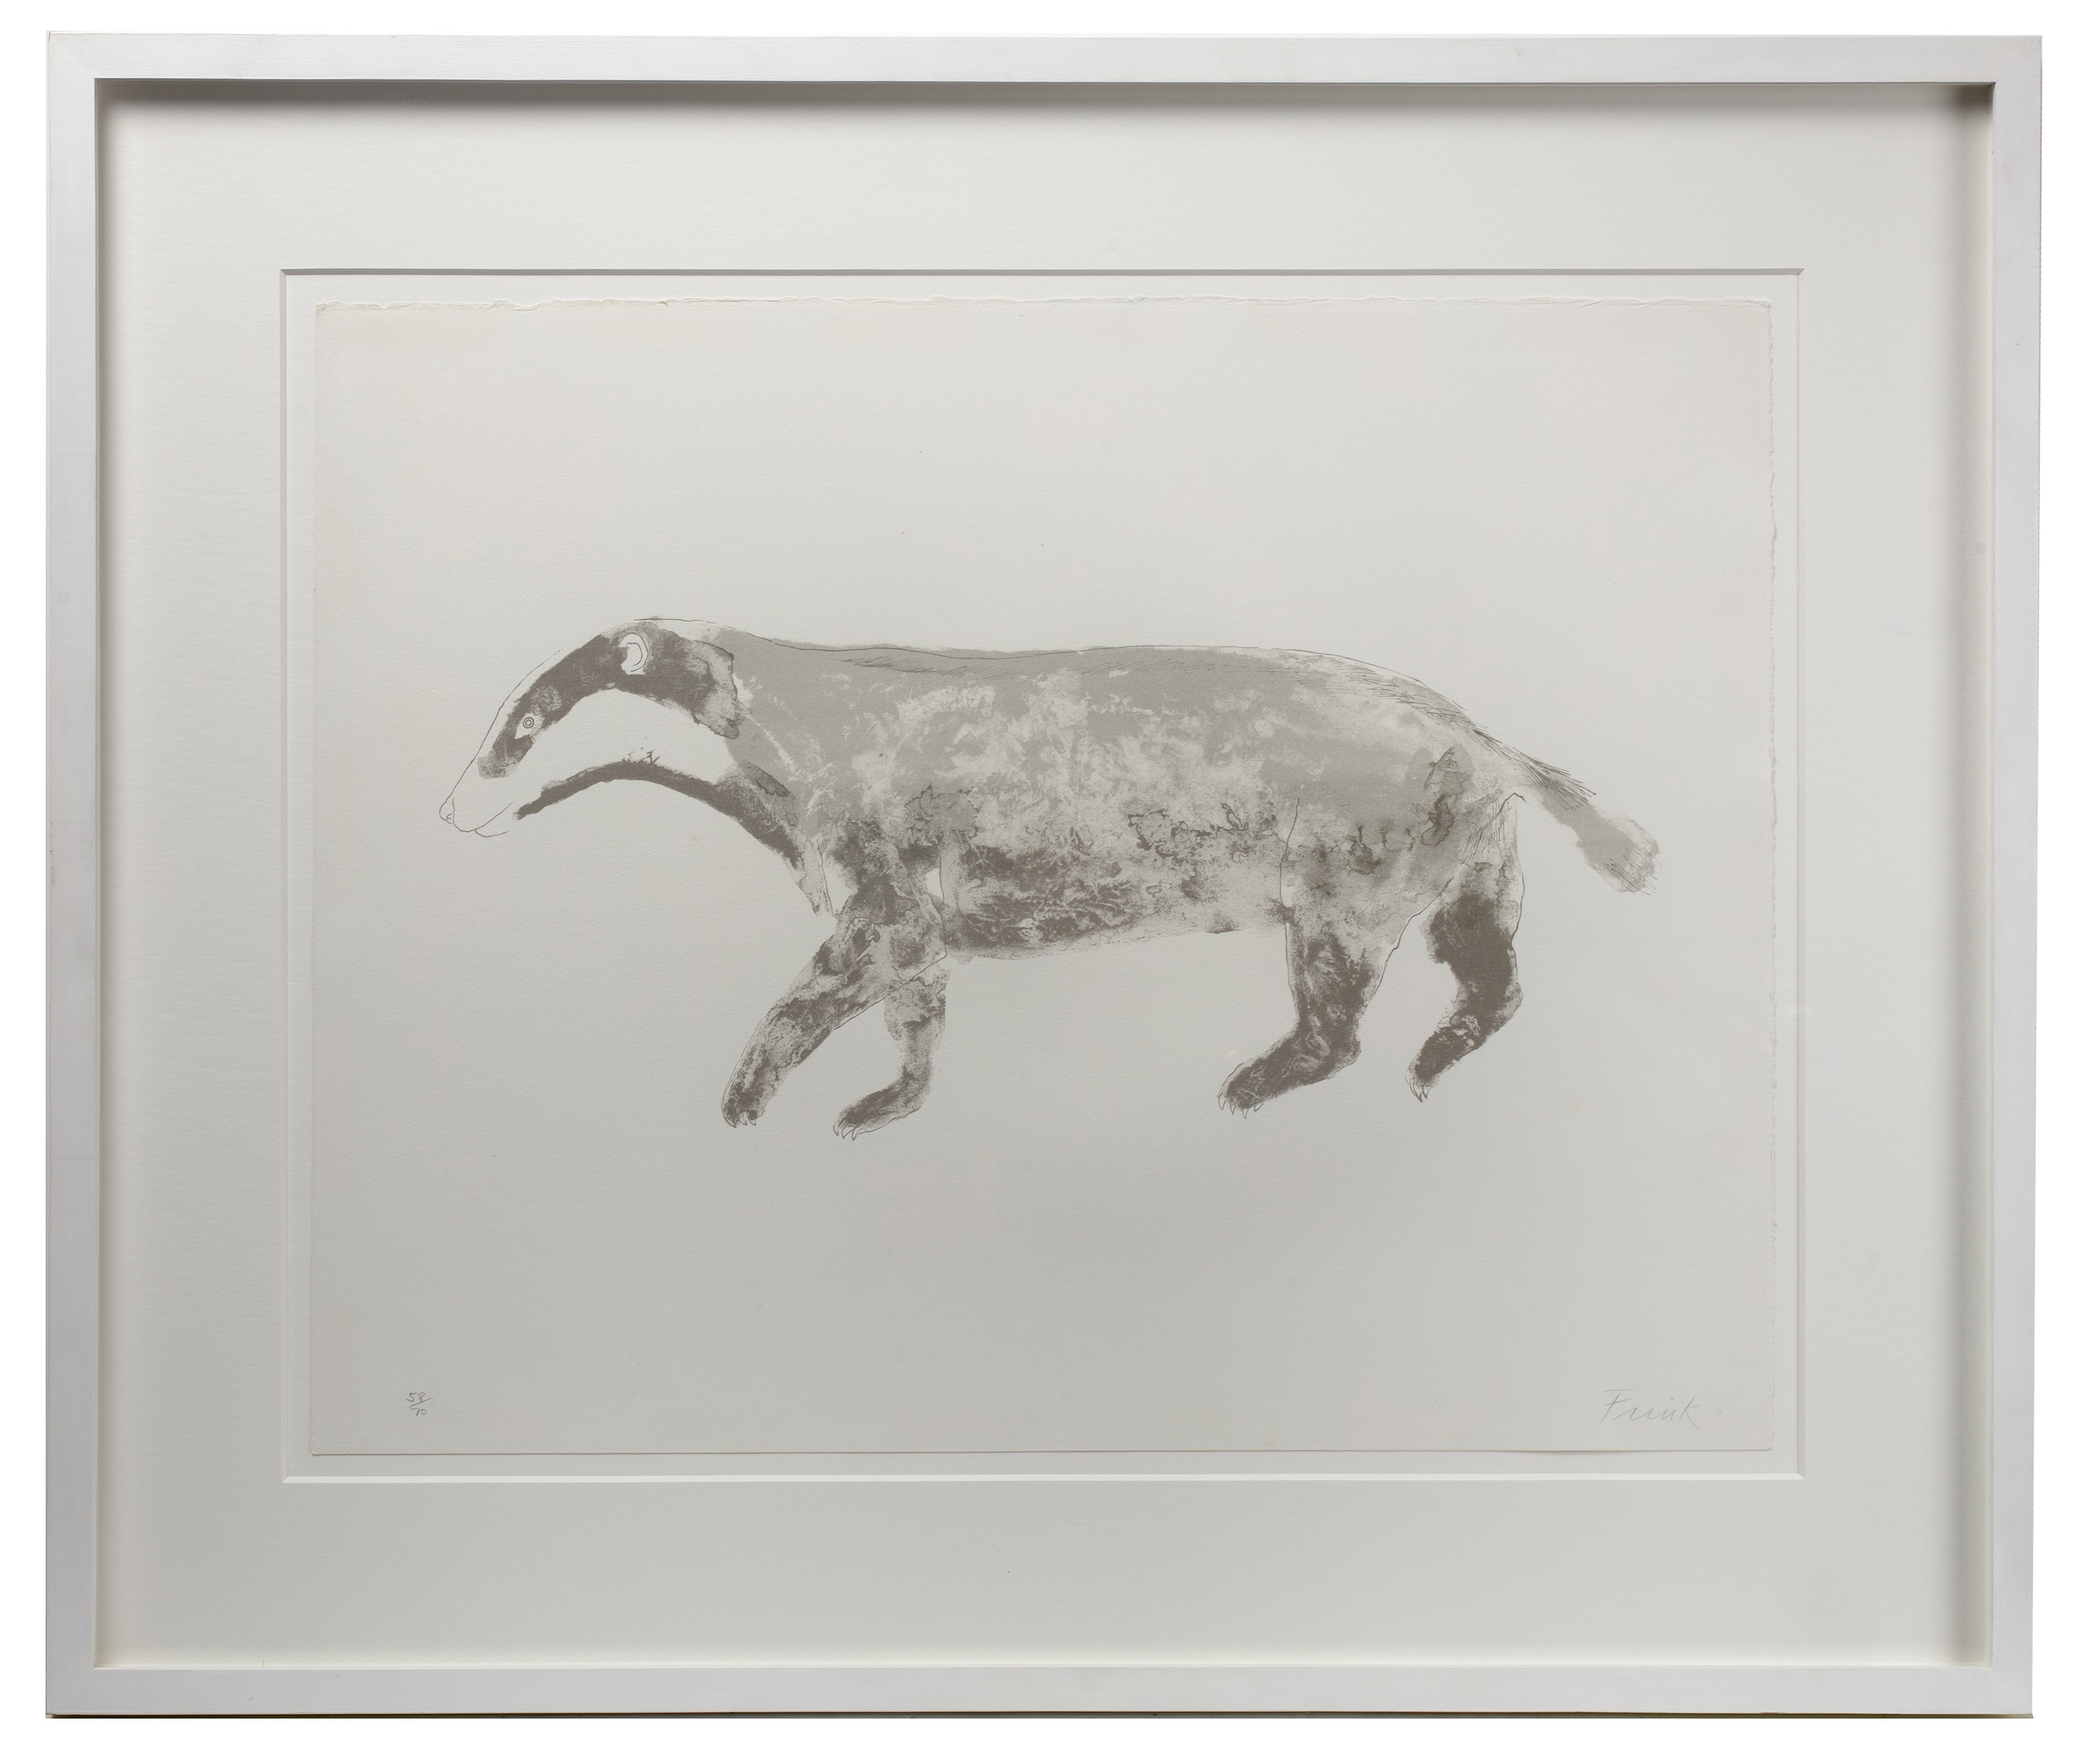 Elisabeth Frink (1930-1993) Badger (Wiseman 32), 1970 from the series Eight Animals 58/70, signed - Image 2 of 3